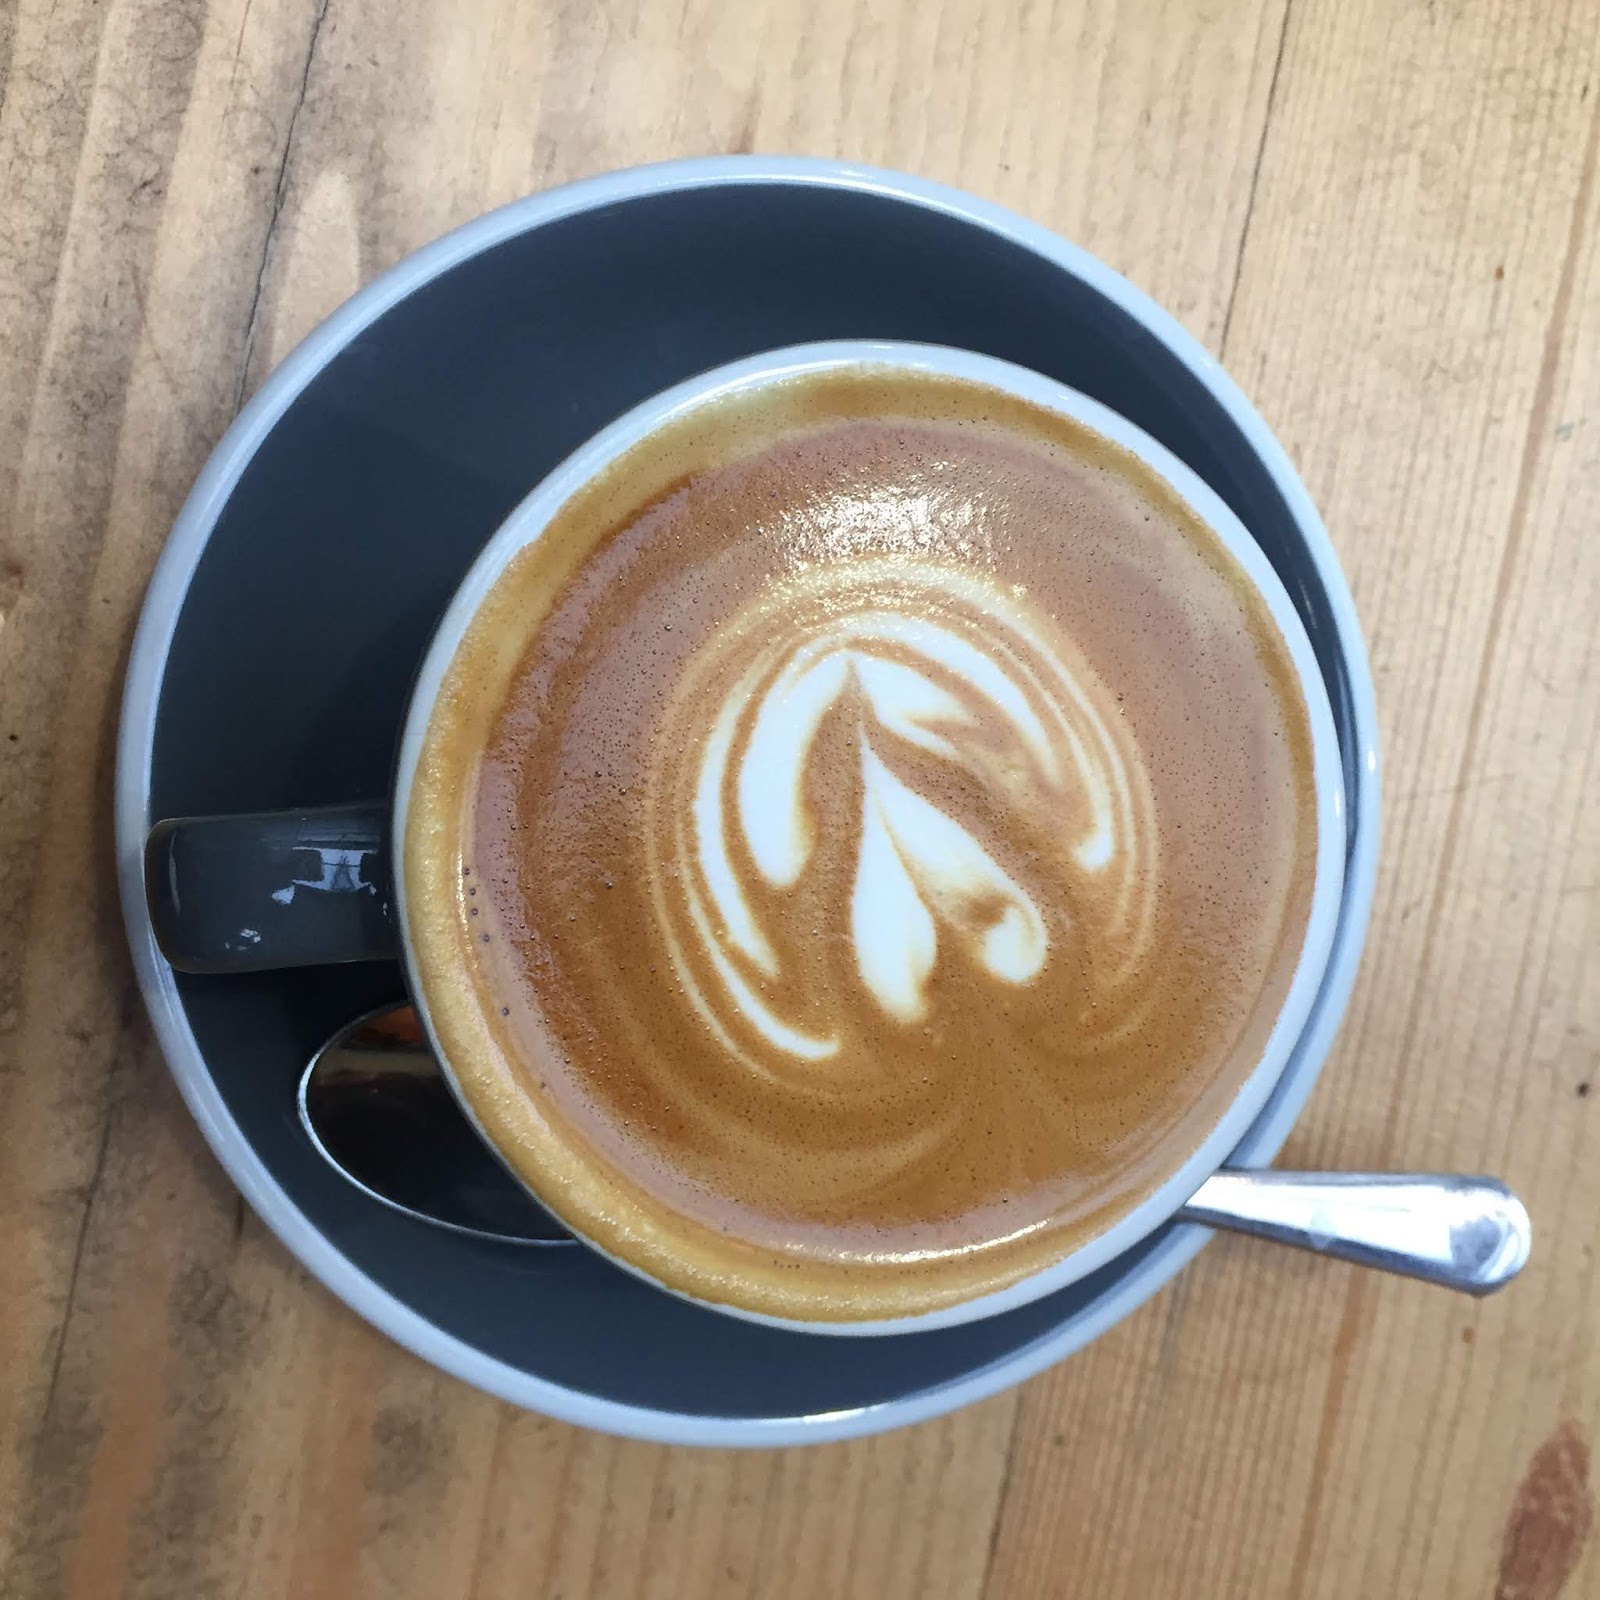 flat white from Department of coffee and social affairs 